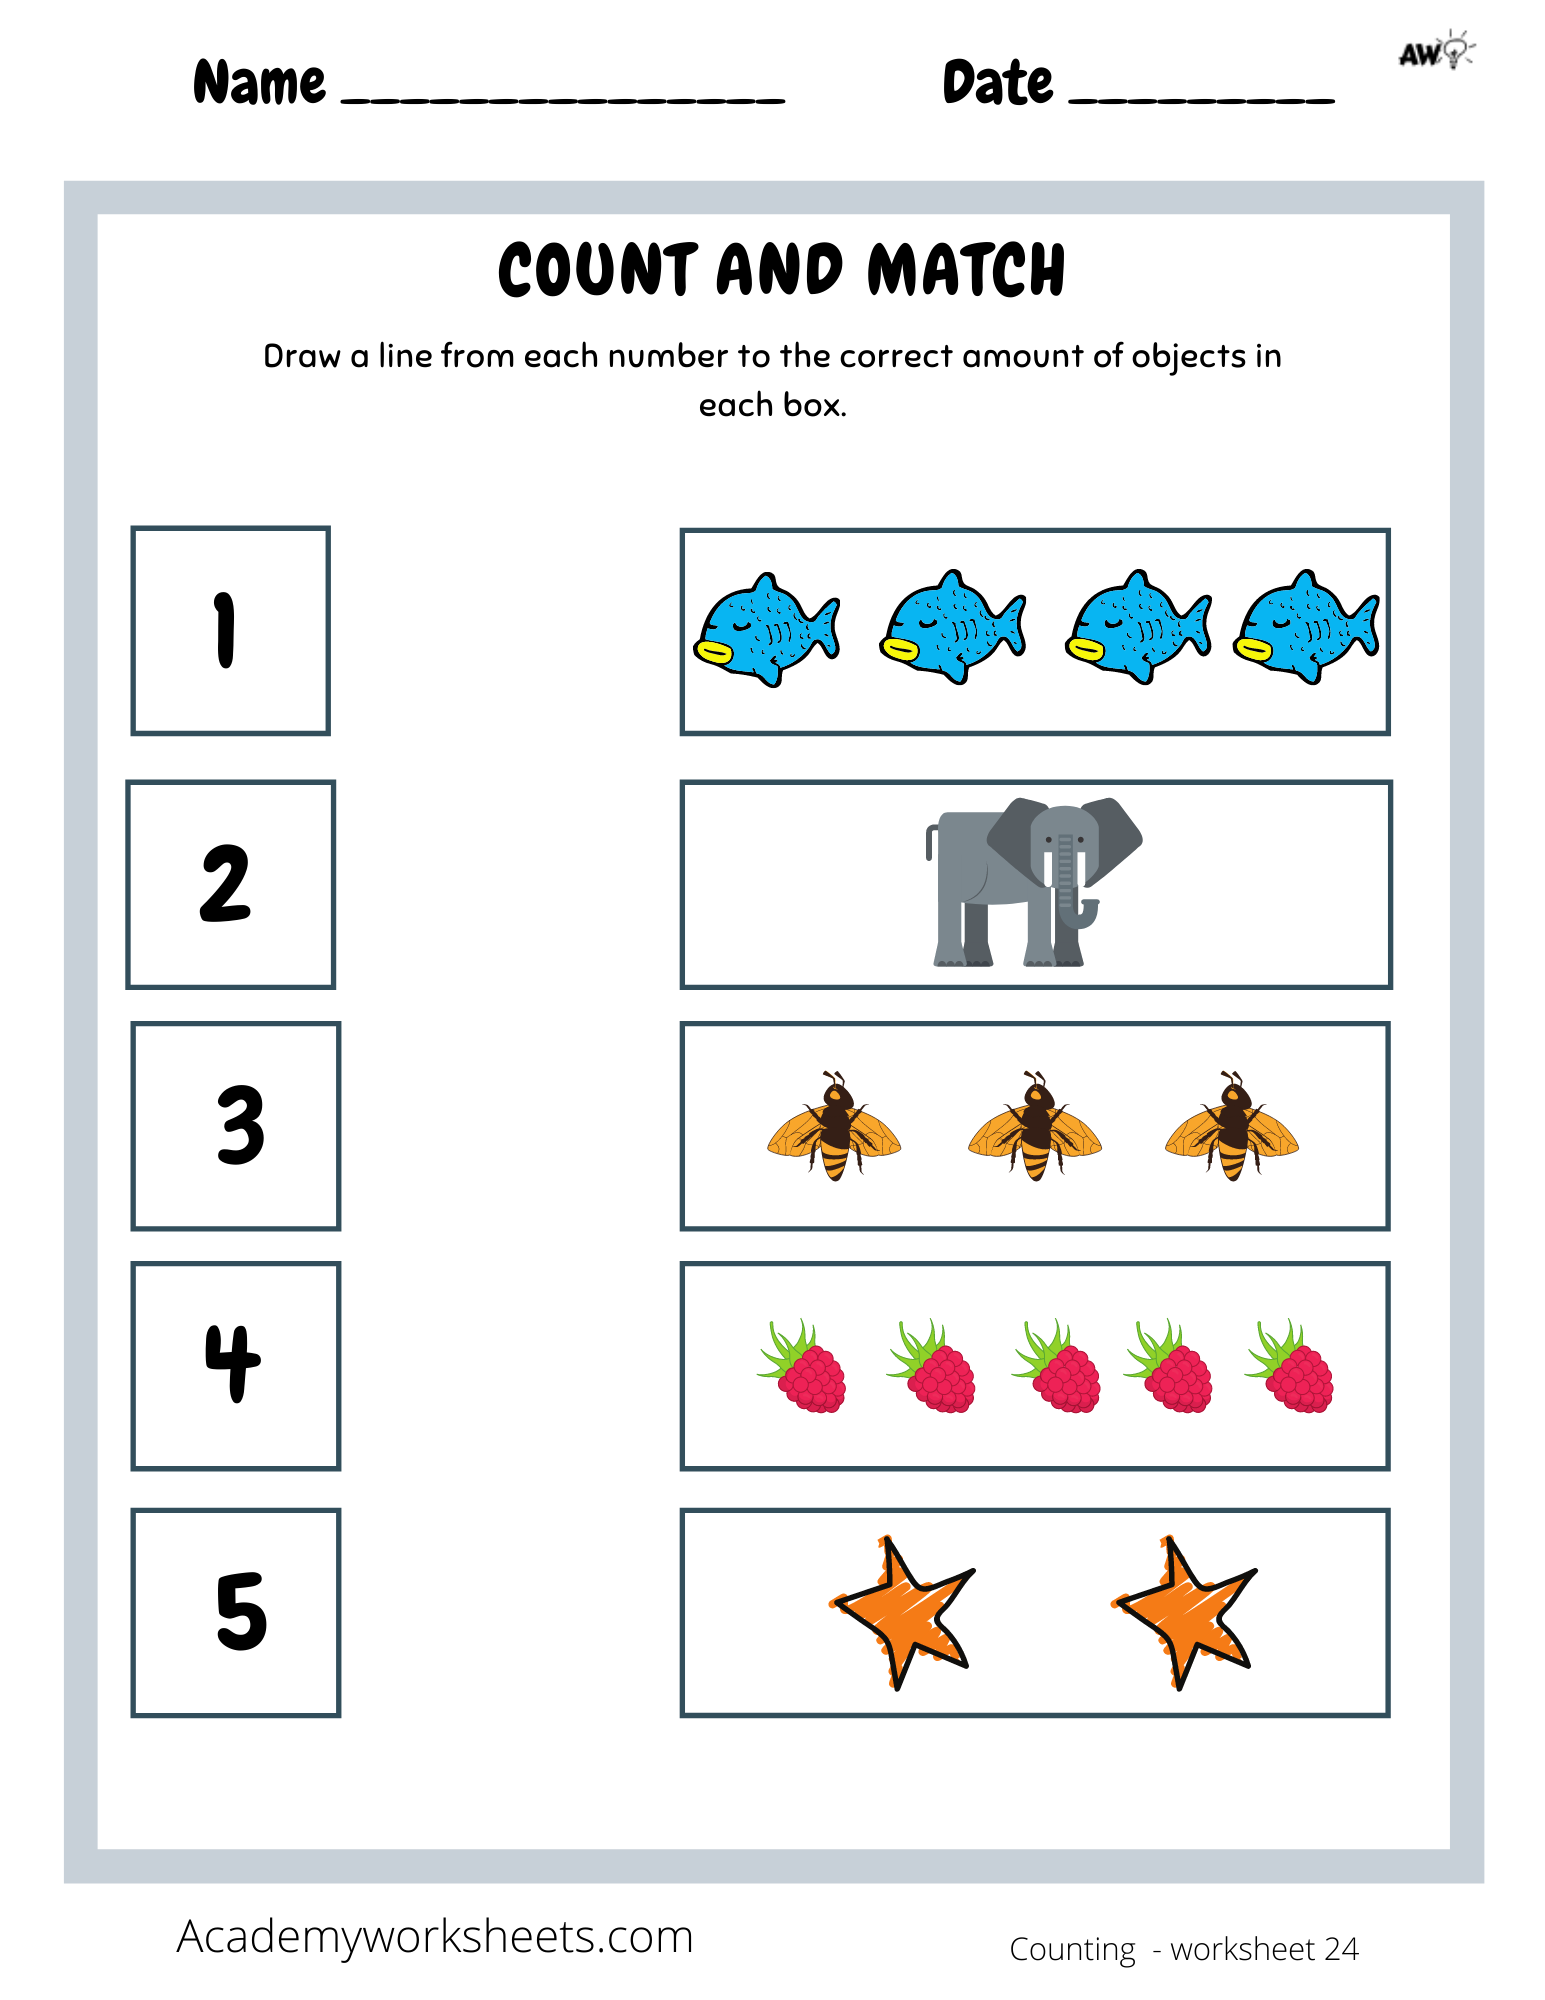 Count and Match Numbers 21-21 Worksheets - Academy Worksheets For Counting By 5s Worksheet